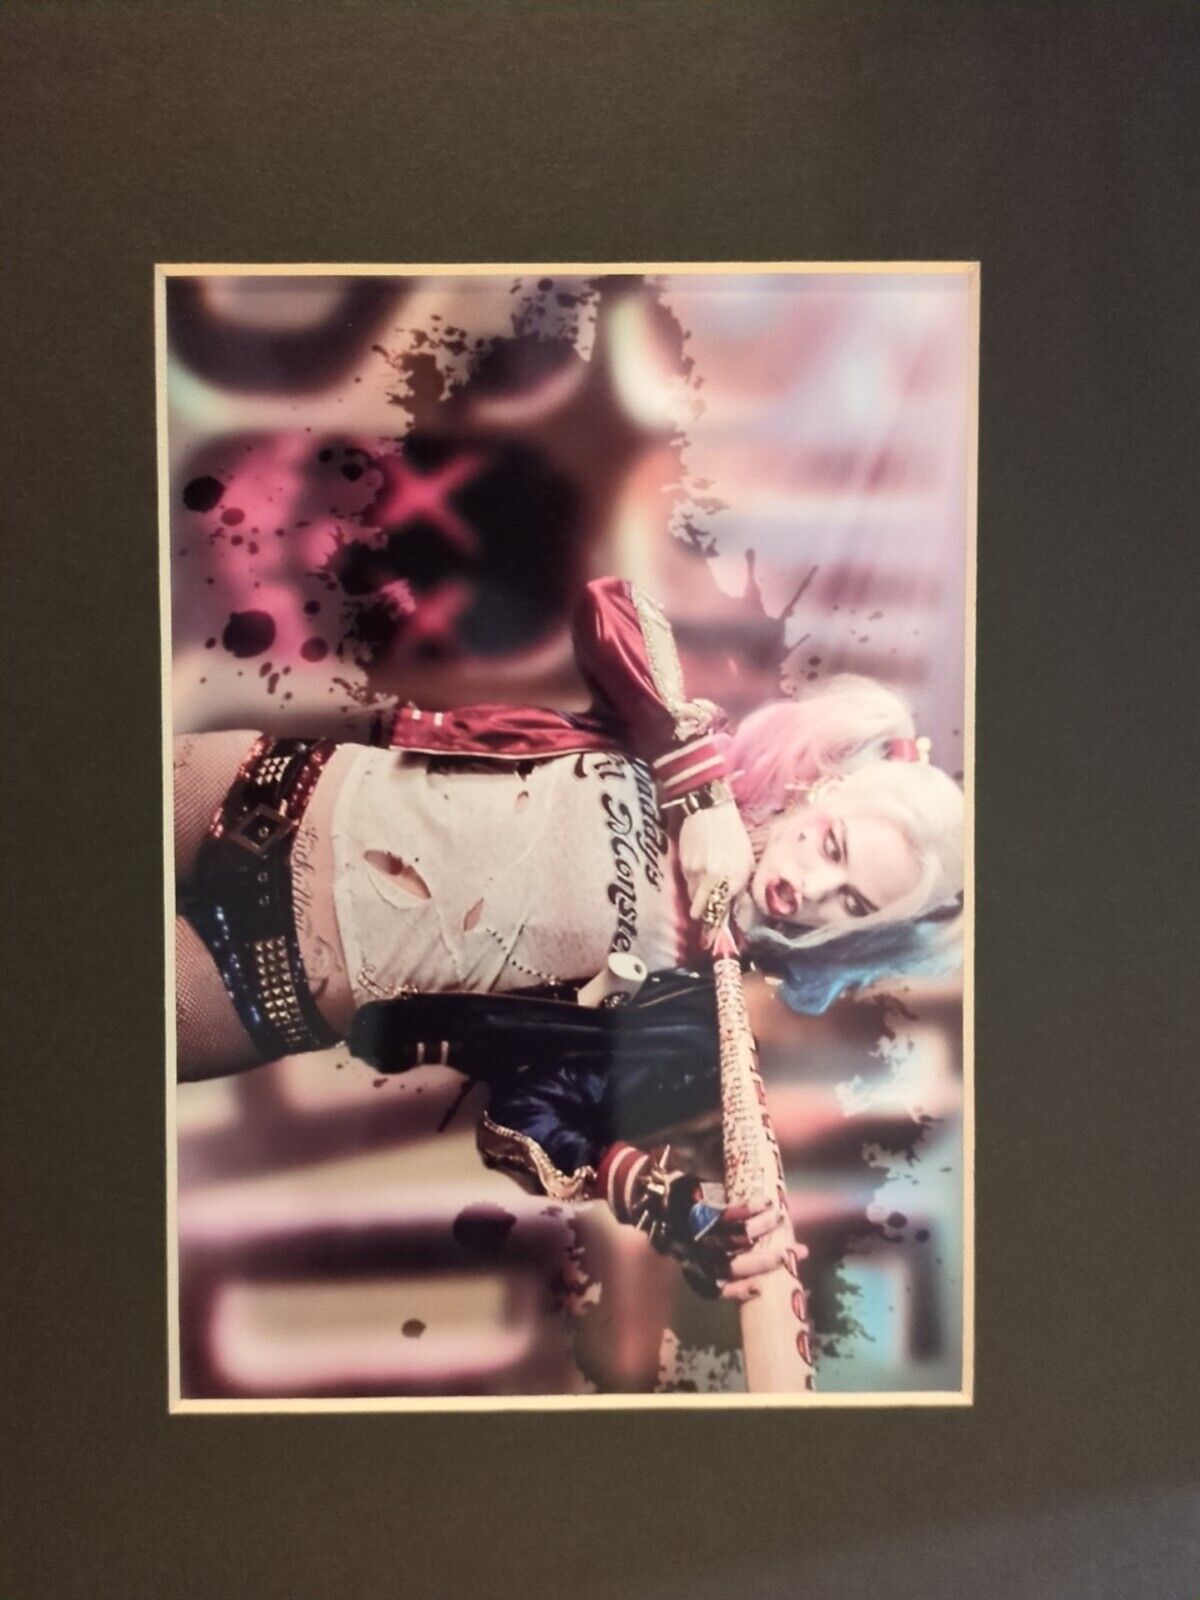 Harley Quinn Suicide Squad Movie Art Print Picture 8x10 Matted Mini Poster Decor